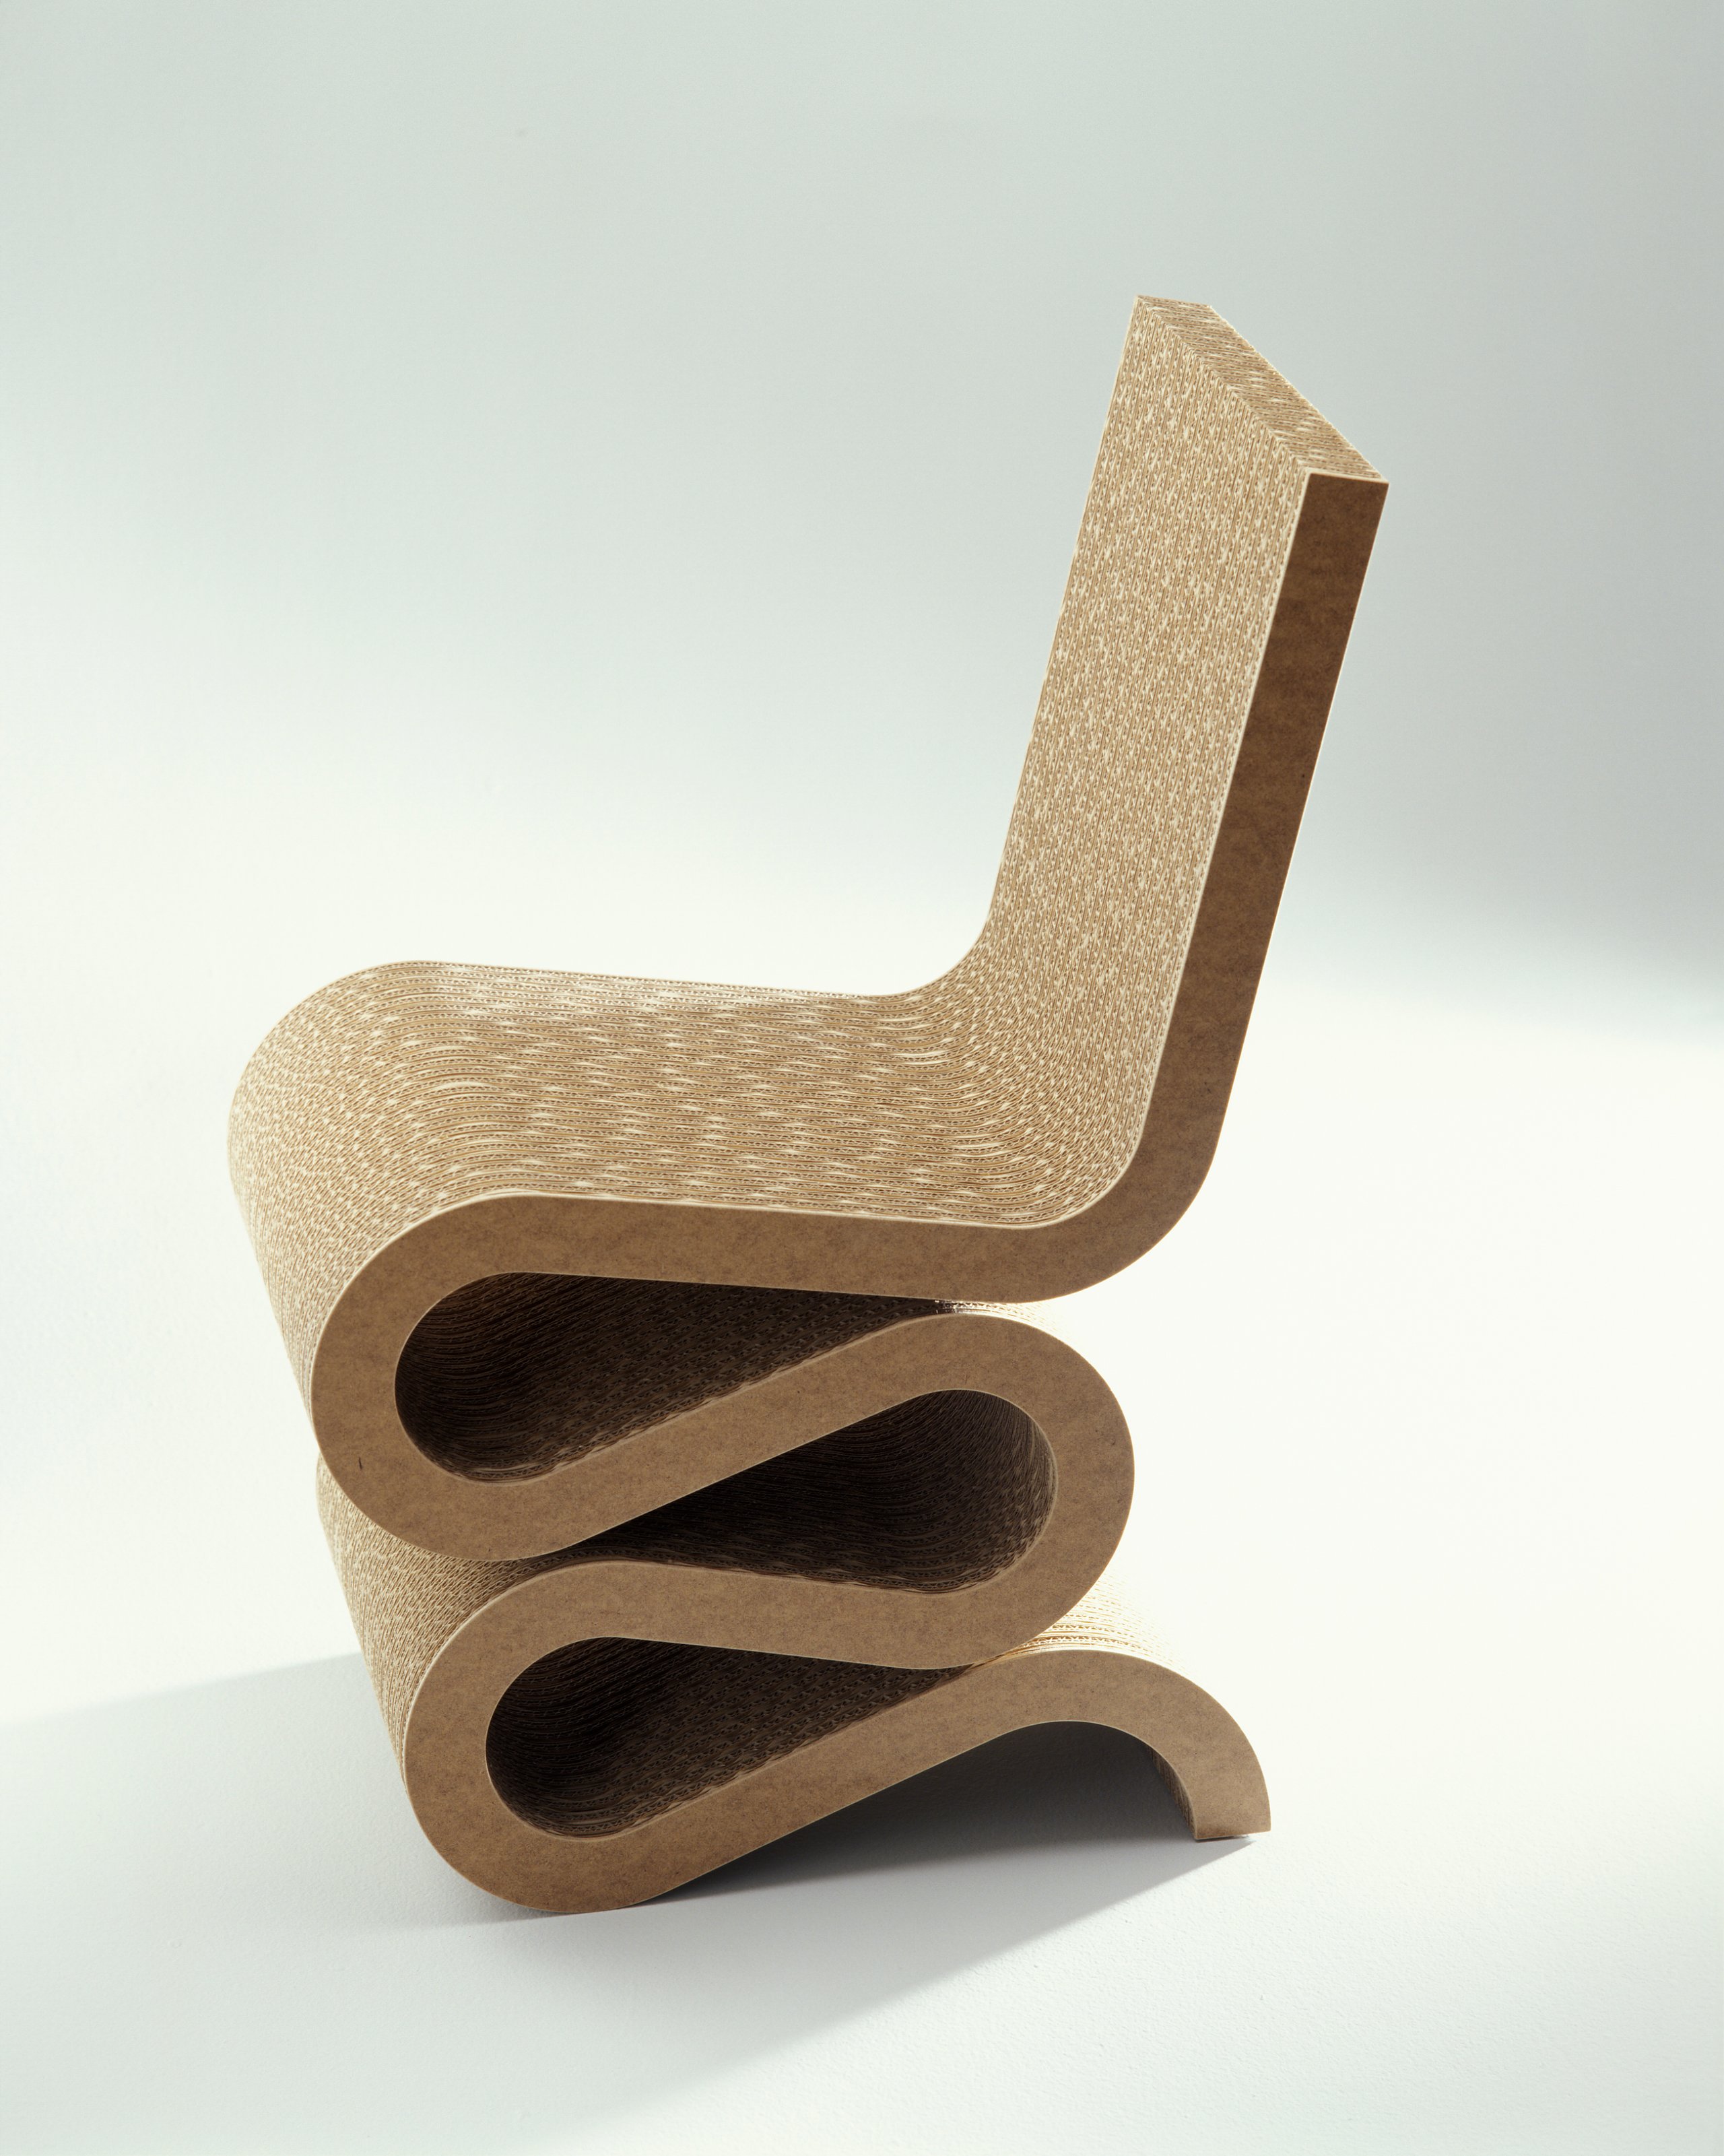 'Wiggle' chair by Frank Gehry